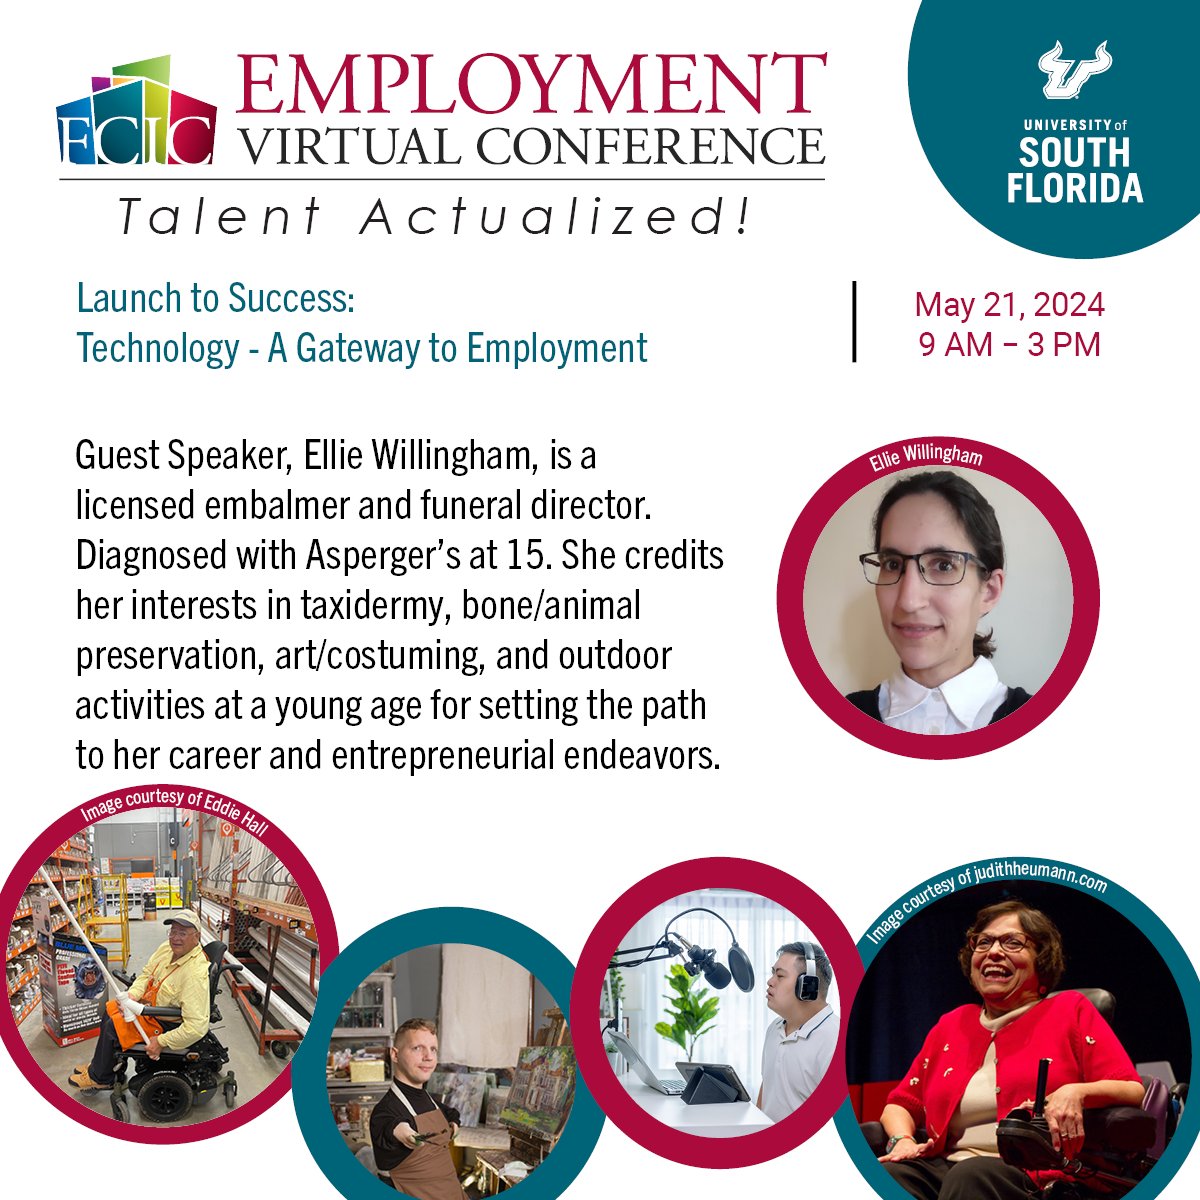 Meet Ellie Willingham, a licensed embalmer and funeral director, and one of the guest speakers for this year's Employment Virtual Conference: Talent Actualized on May 21, 2024. 

To register visit: tinyurl.com/EVC-2024

#EmploymentConference #DevelopmentalDisability #DD